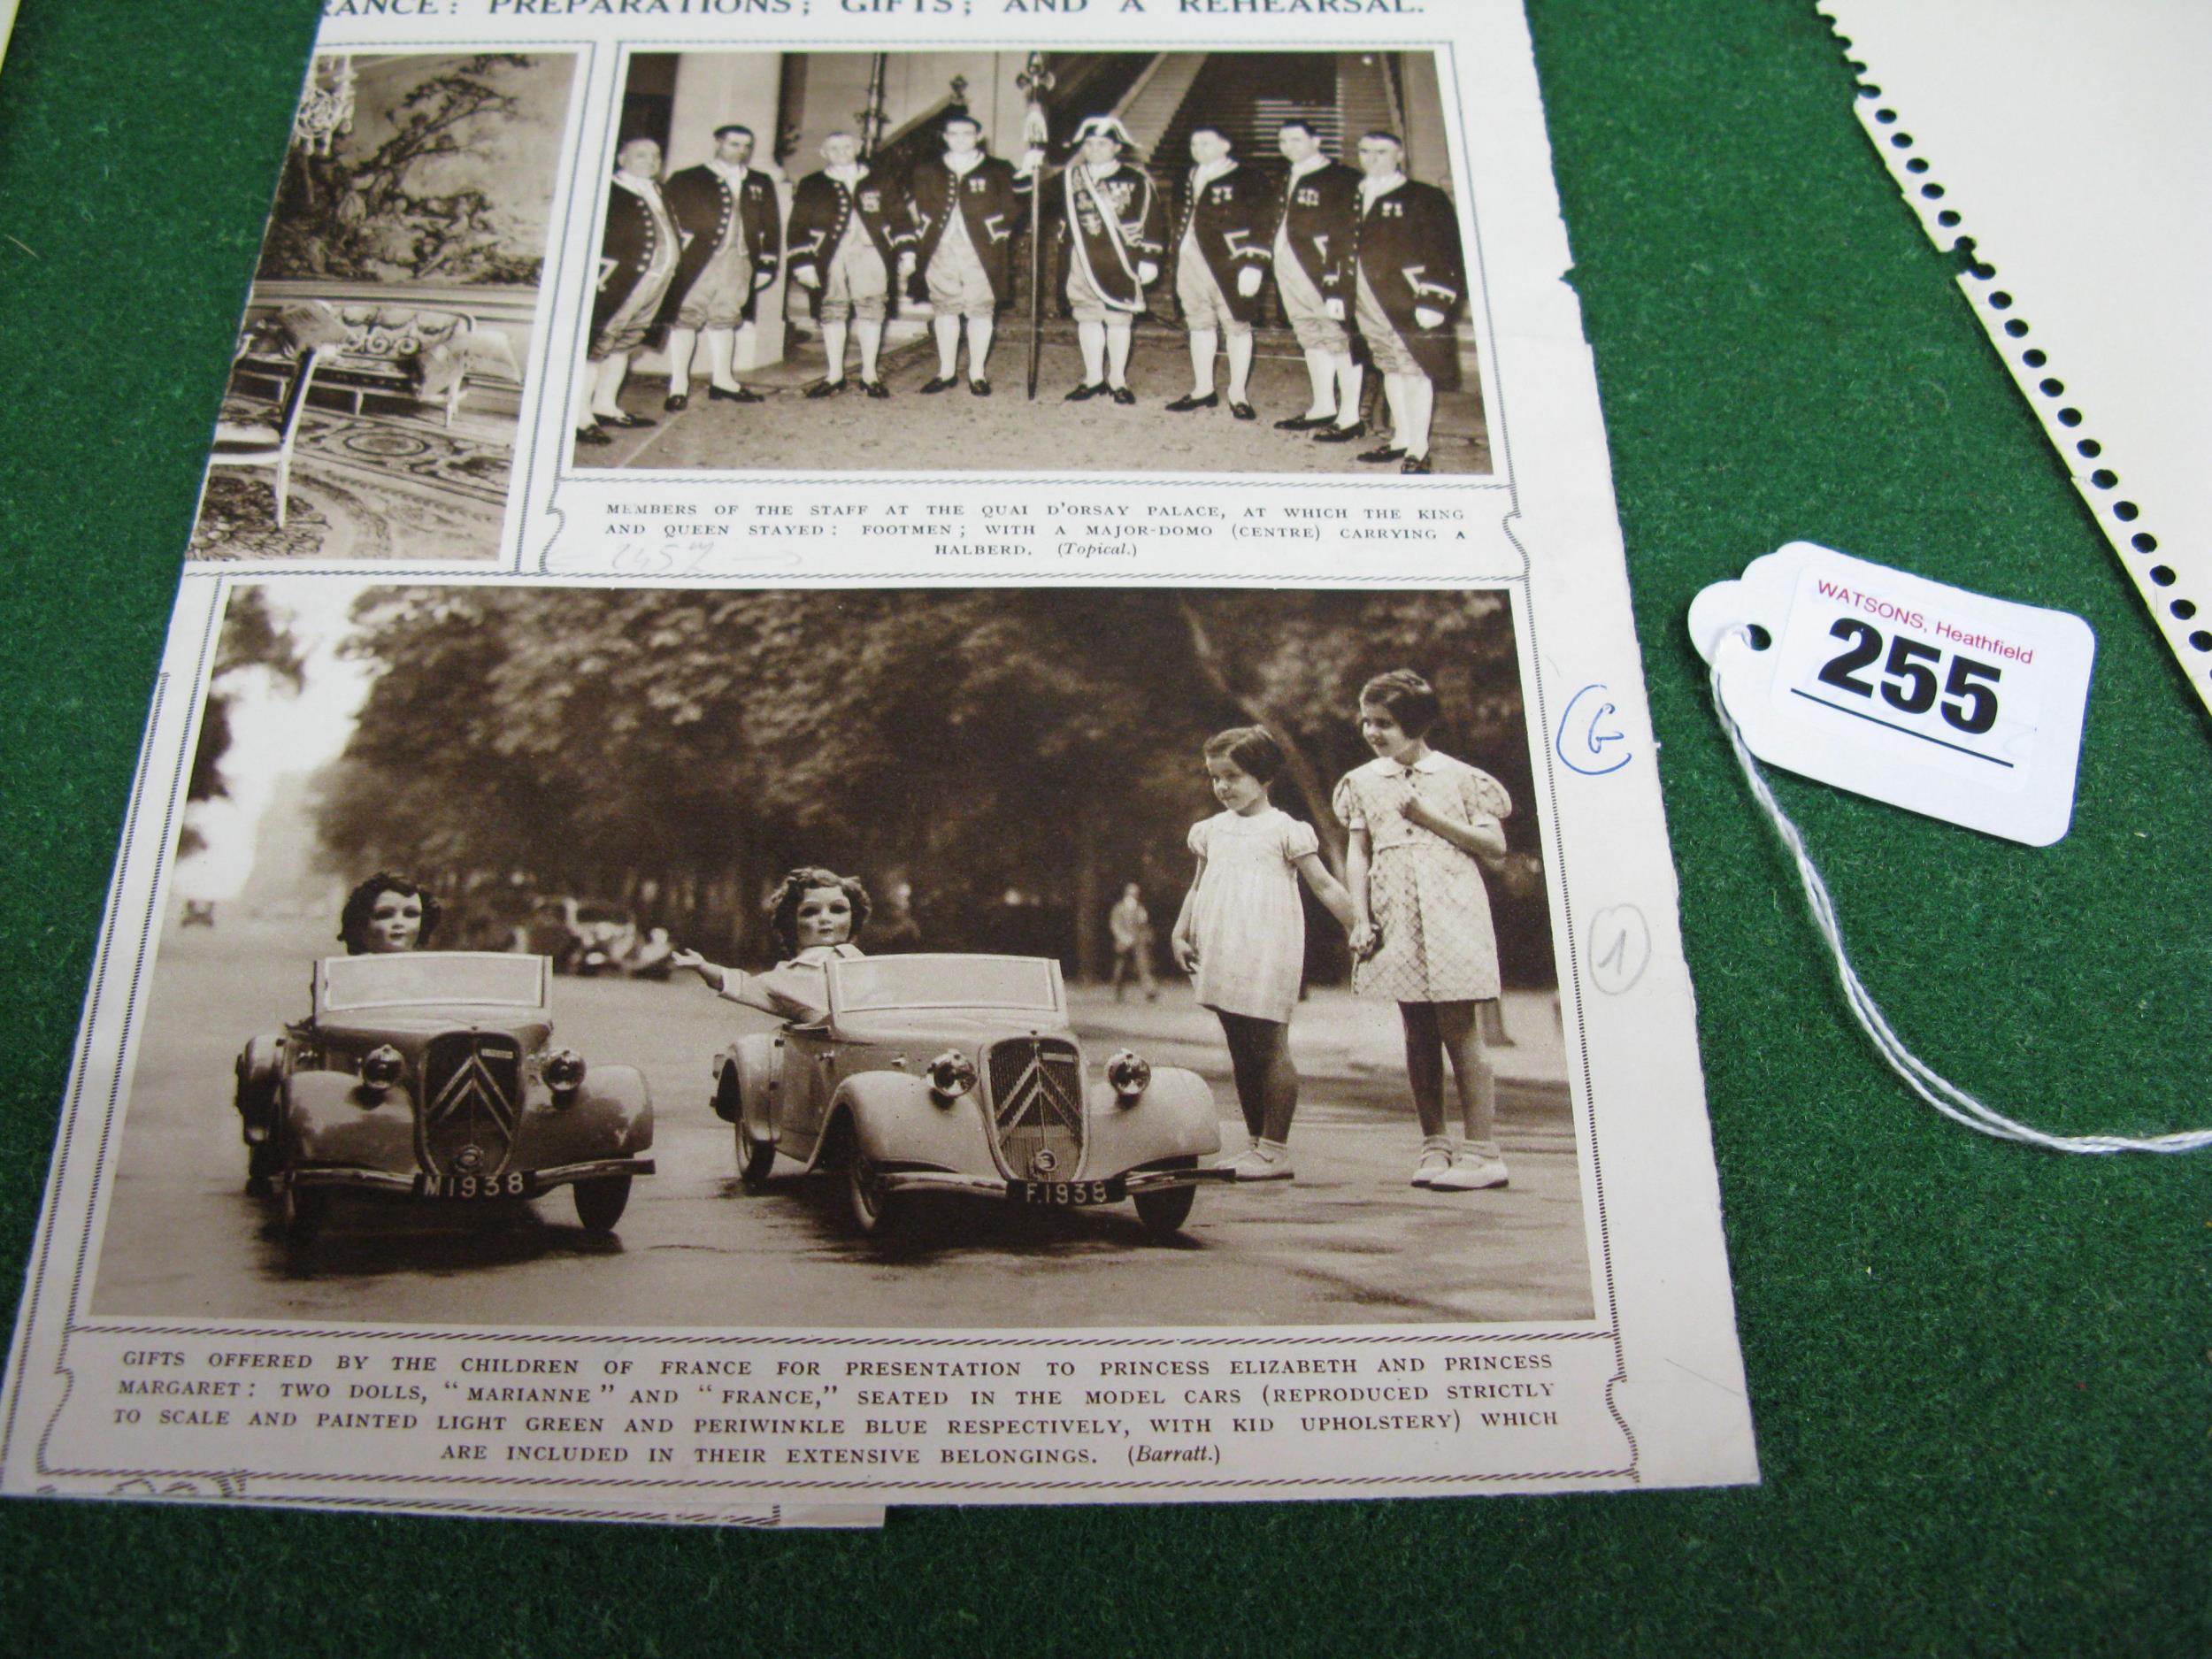 Folder of period photographs, slides, letters and cuttings relating to French childrens 1938 gift to - Image 2 of 3